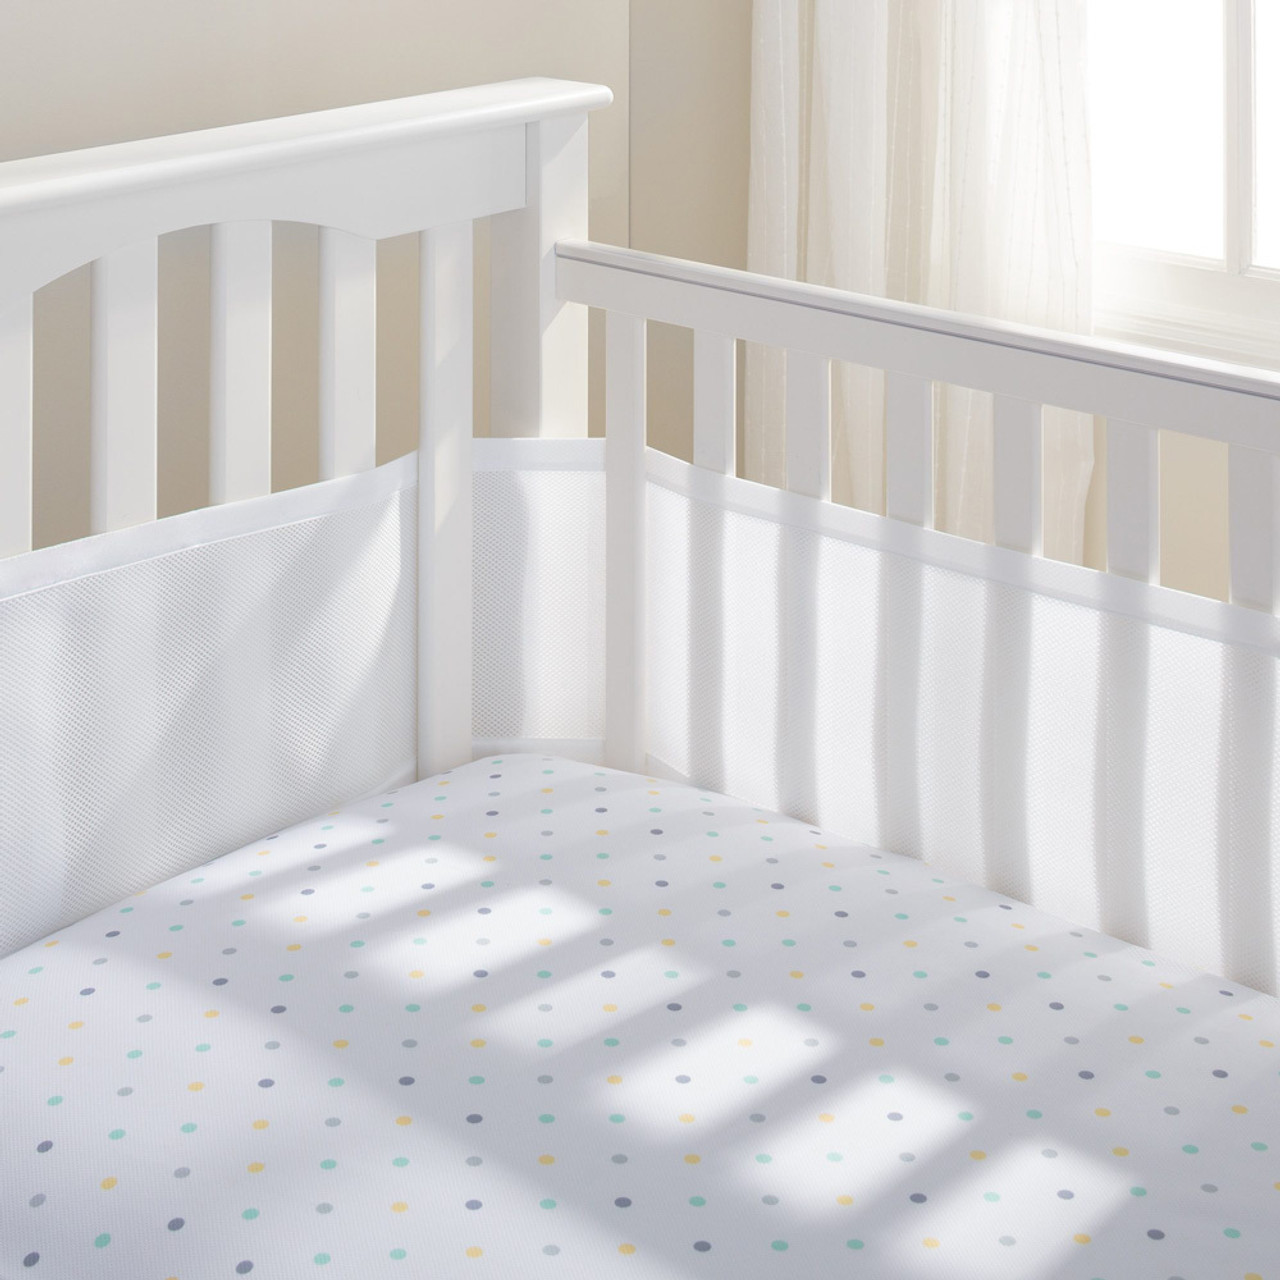 Crib Bumper Review: A Comprehensive Analysis of the Best Options